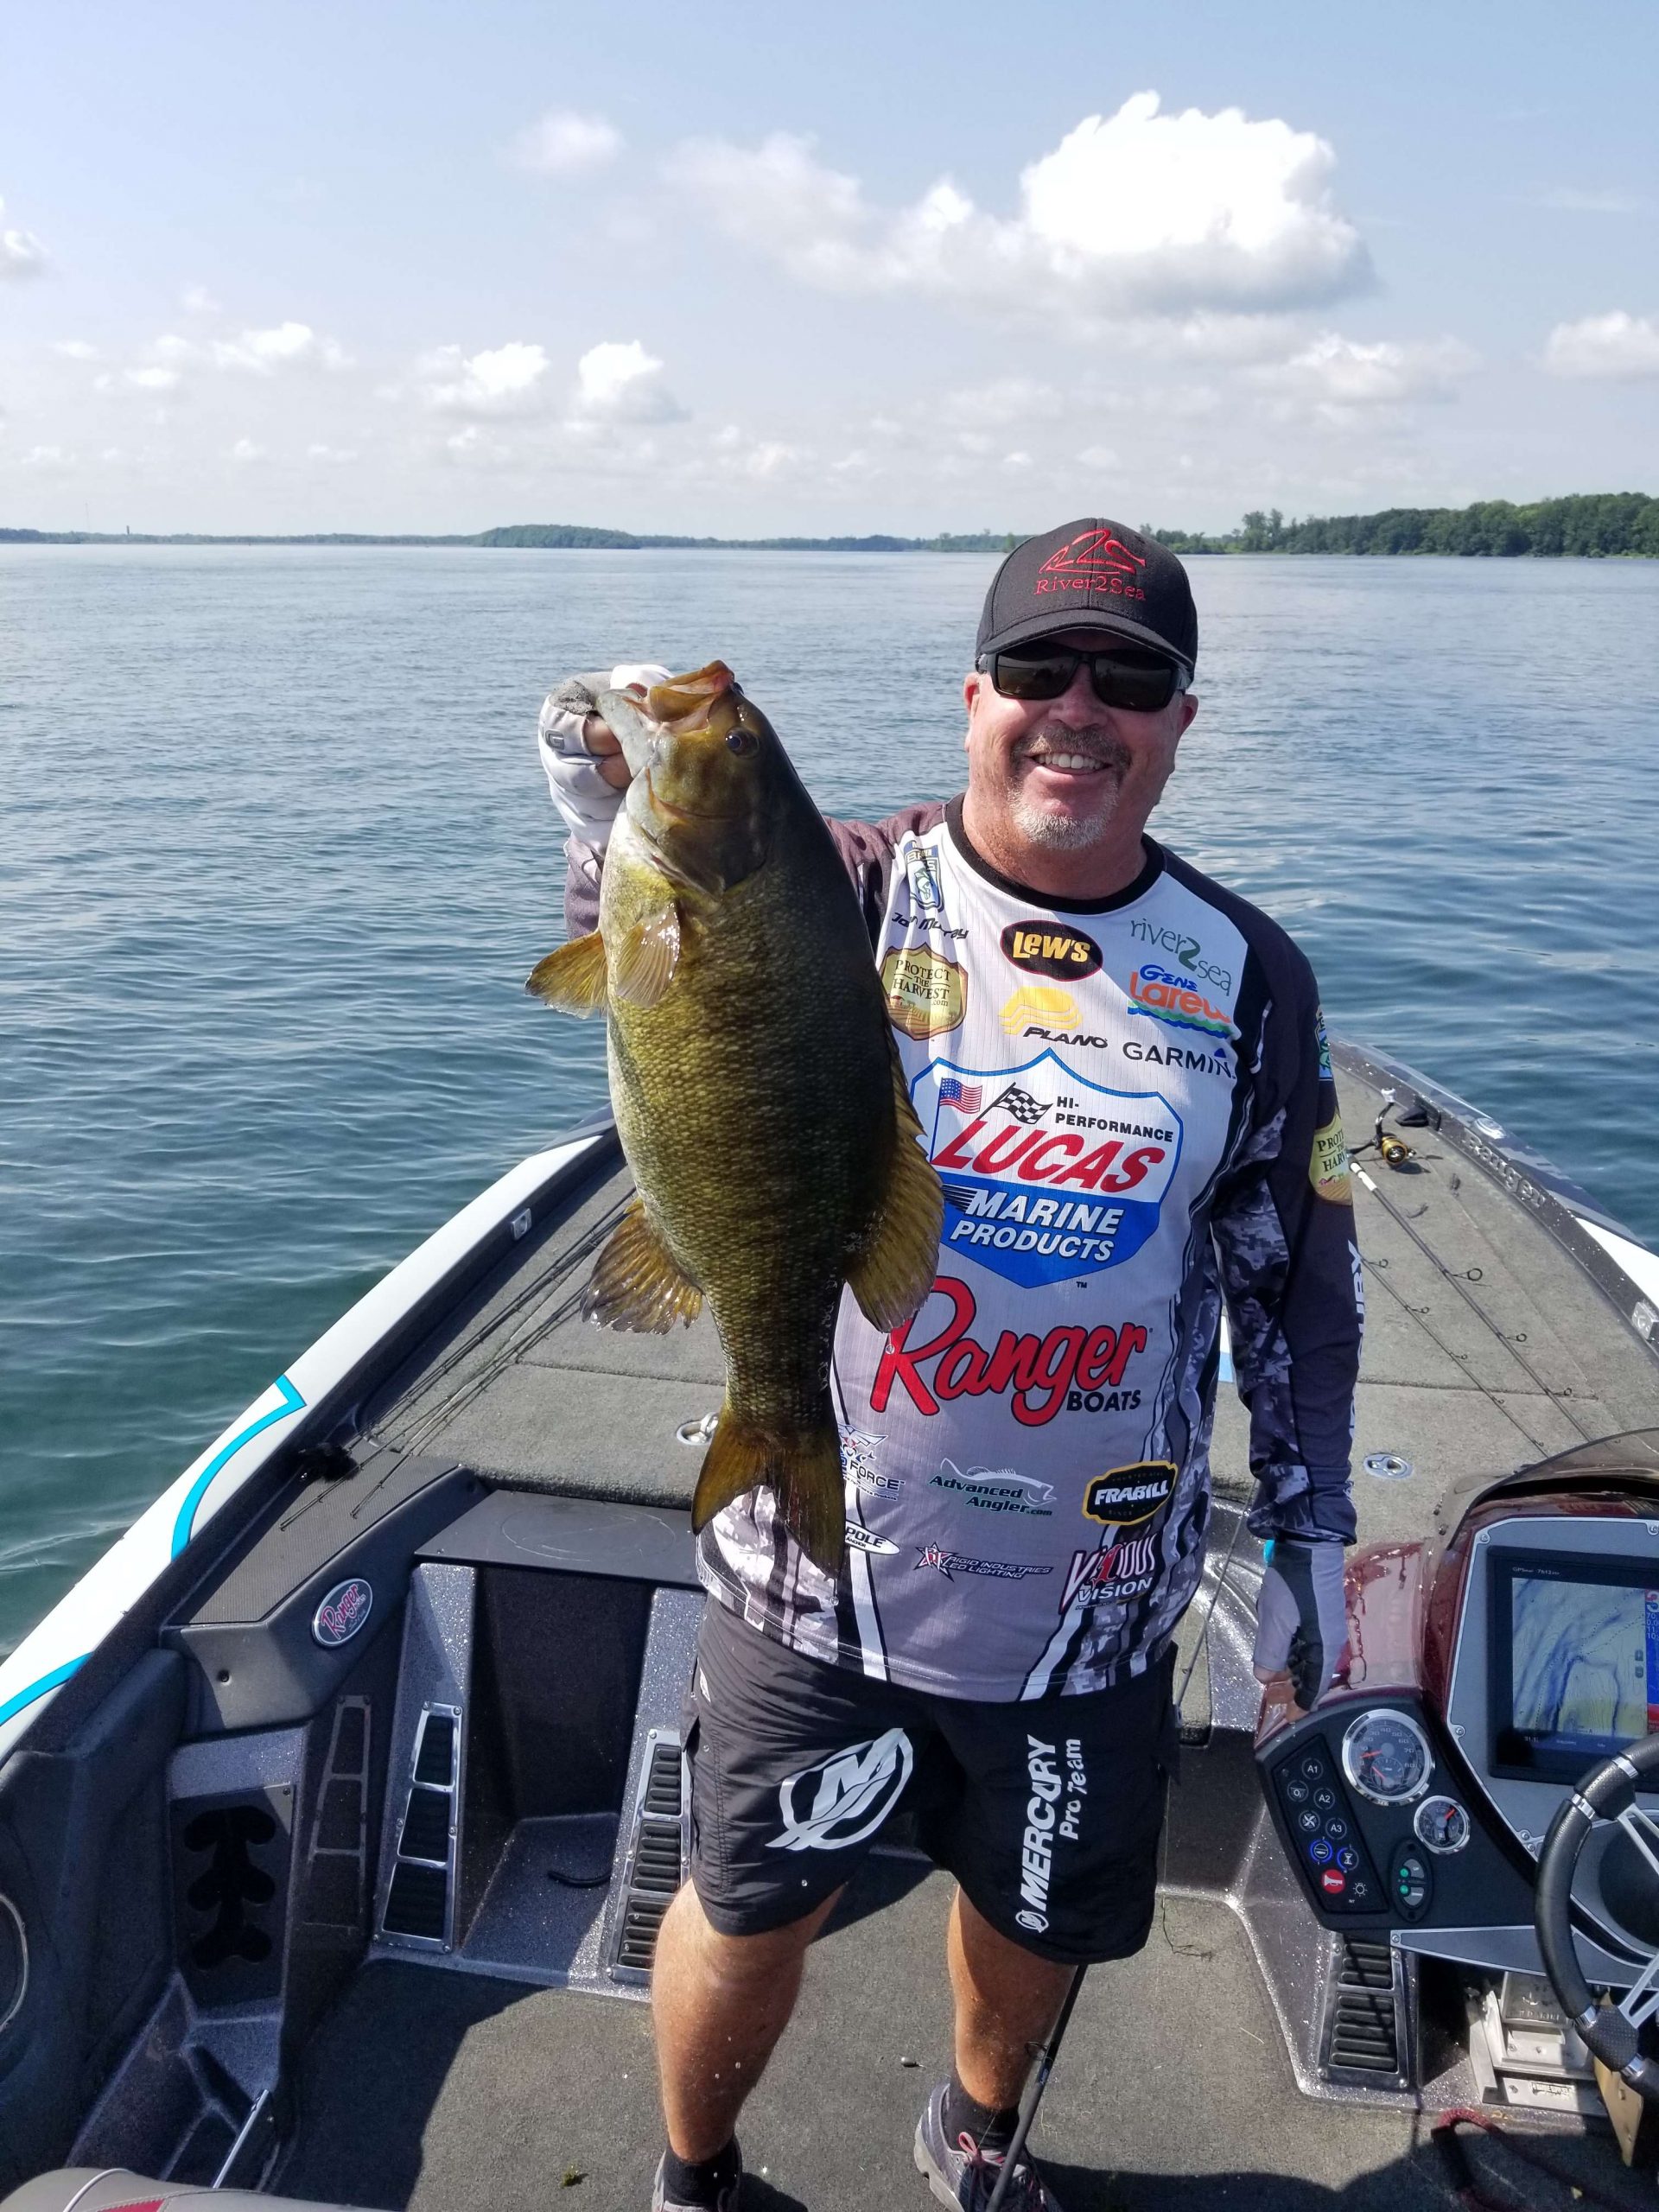 Monster Smallmouth for fish #7 for Murray. Things are looking up today for Day 1. 